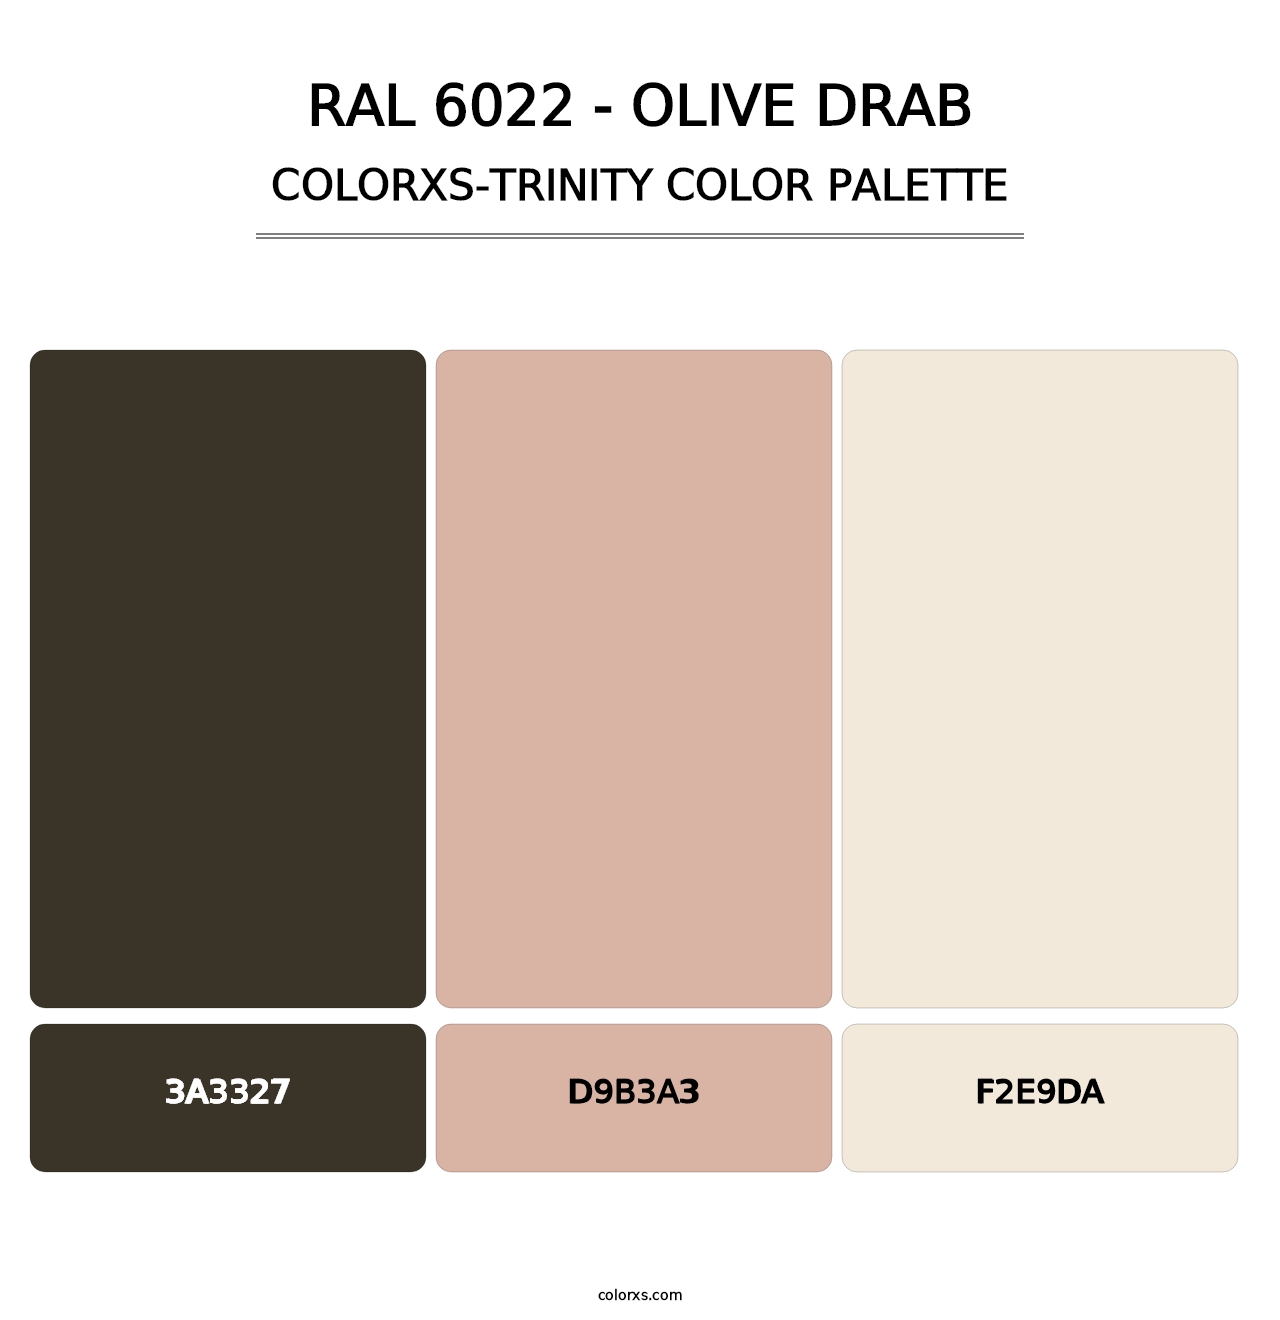 RAL 6022 - Olive Drab - Colorxs Trinity Palette